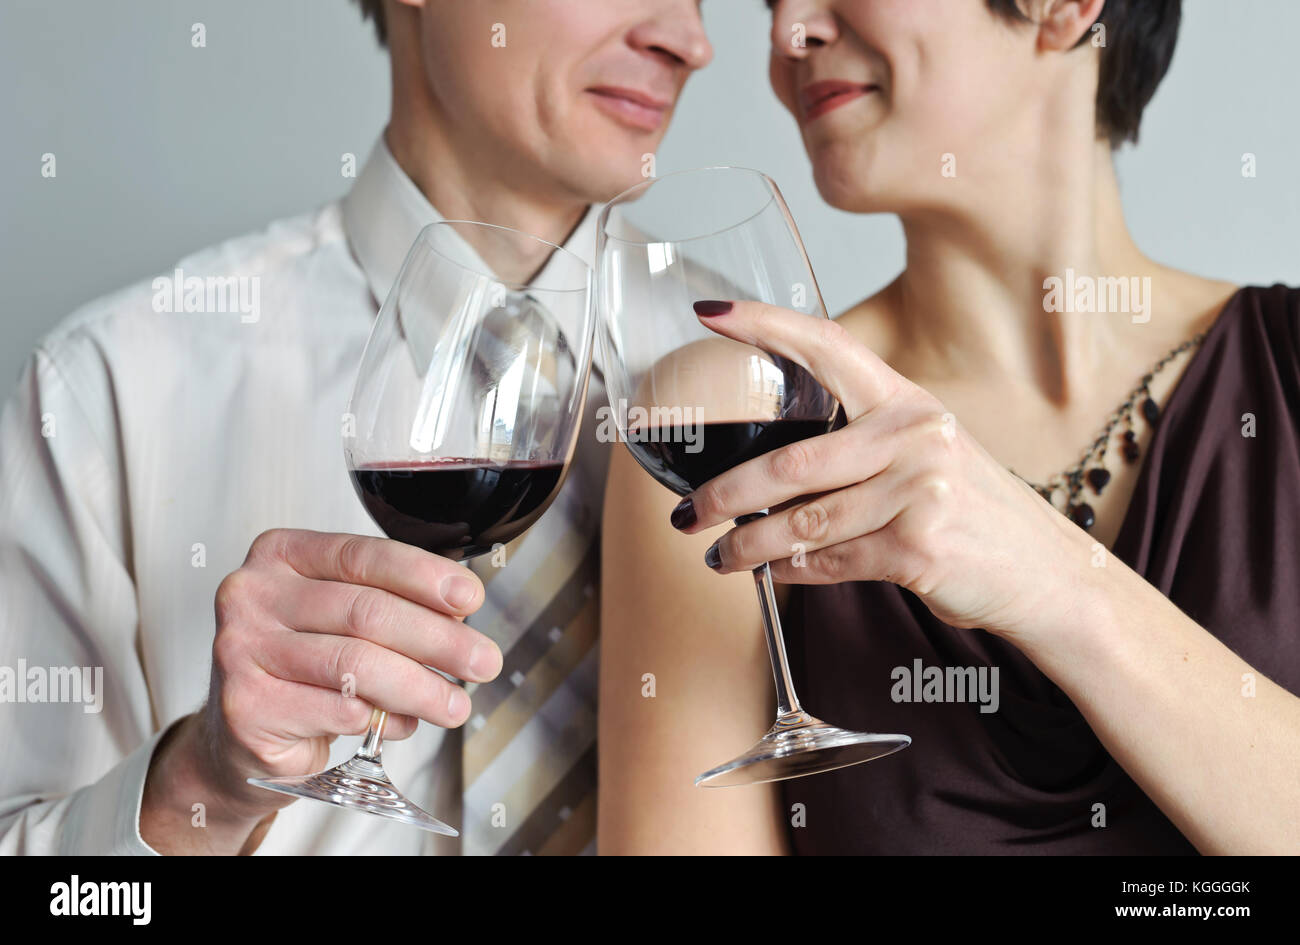 Close-up. Woman holding a glass of red wine leaning to the man Stock Photo